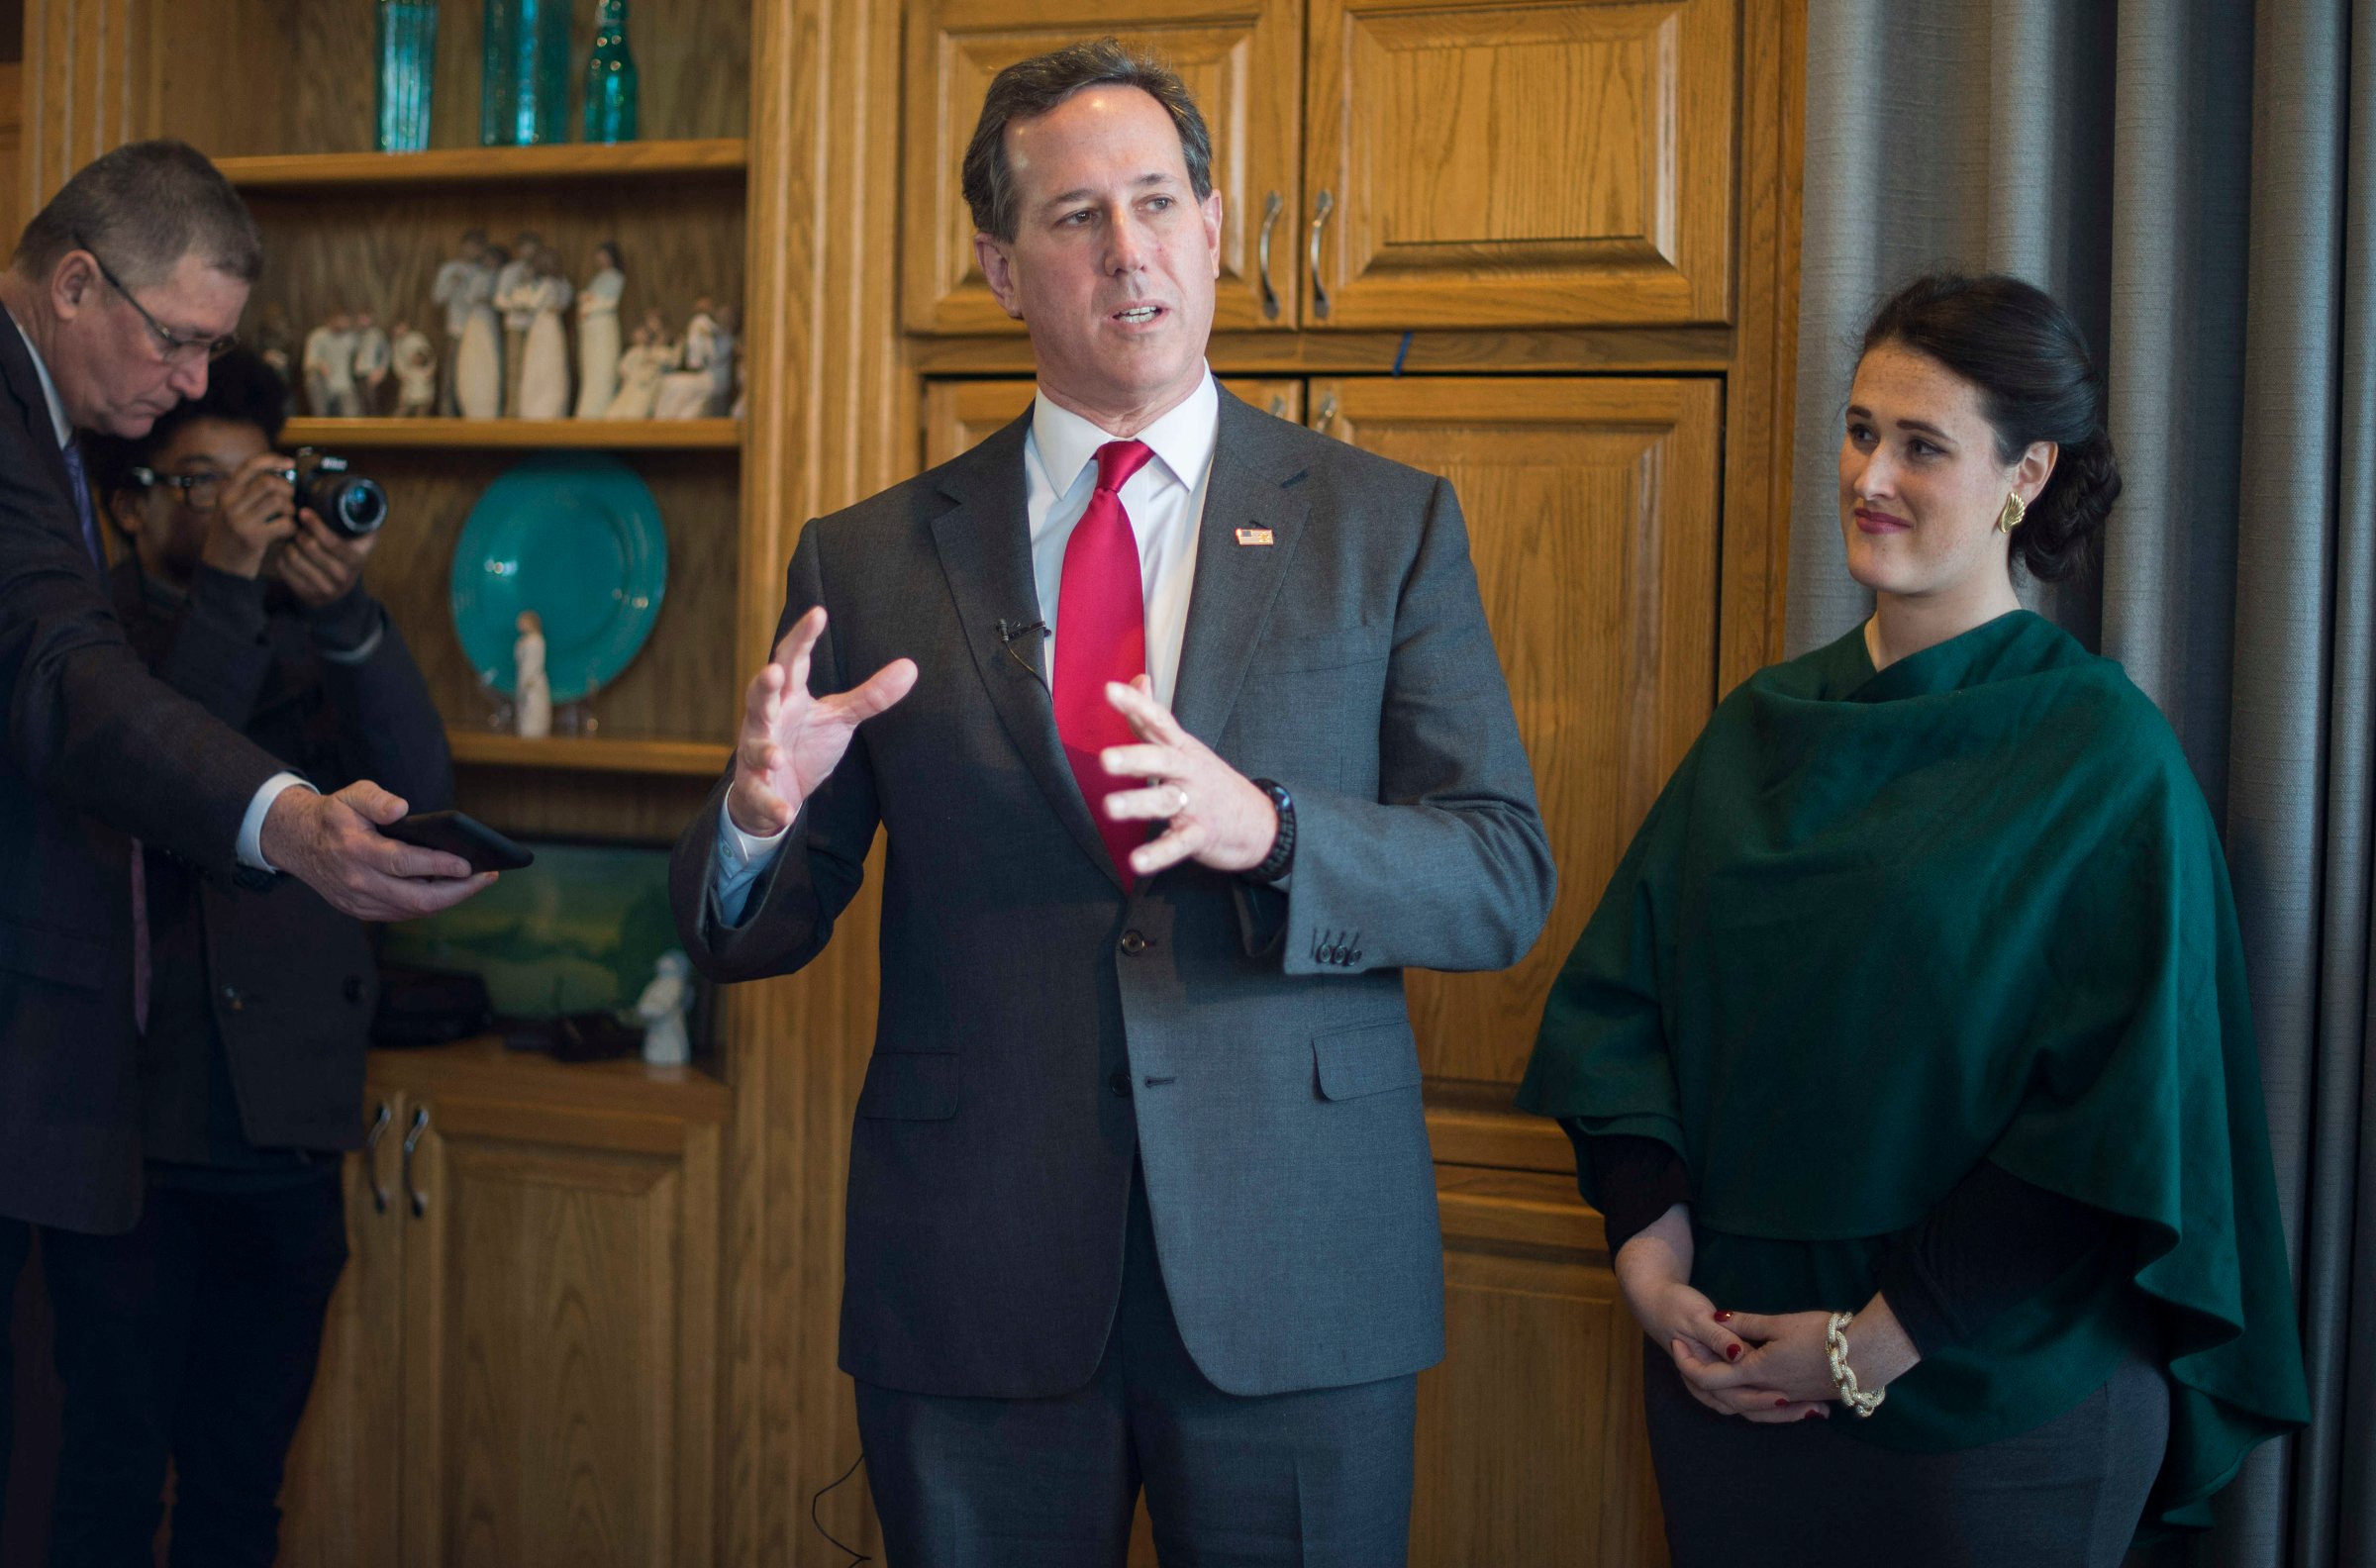 Republican presidential candidate Rick Santorum speaks beside daughter Elizabeth during a campaign stop at a private residence in West Des Moines, Iowa, on Jan. 31, 2016, ahead of the Iowa Caucus.